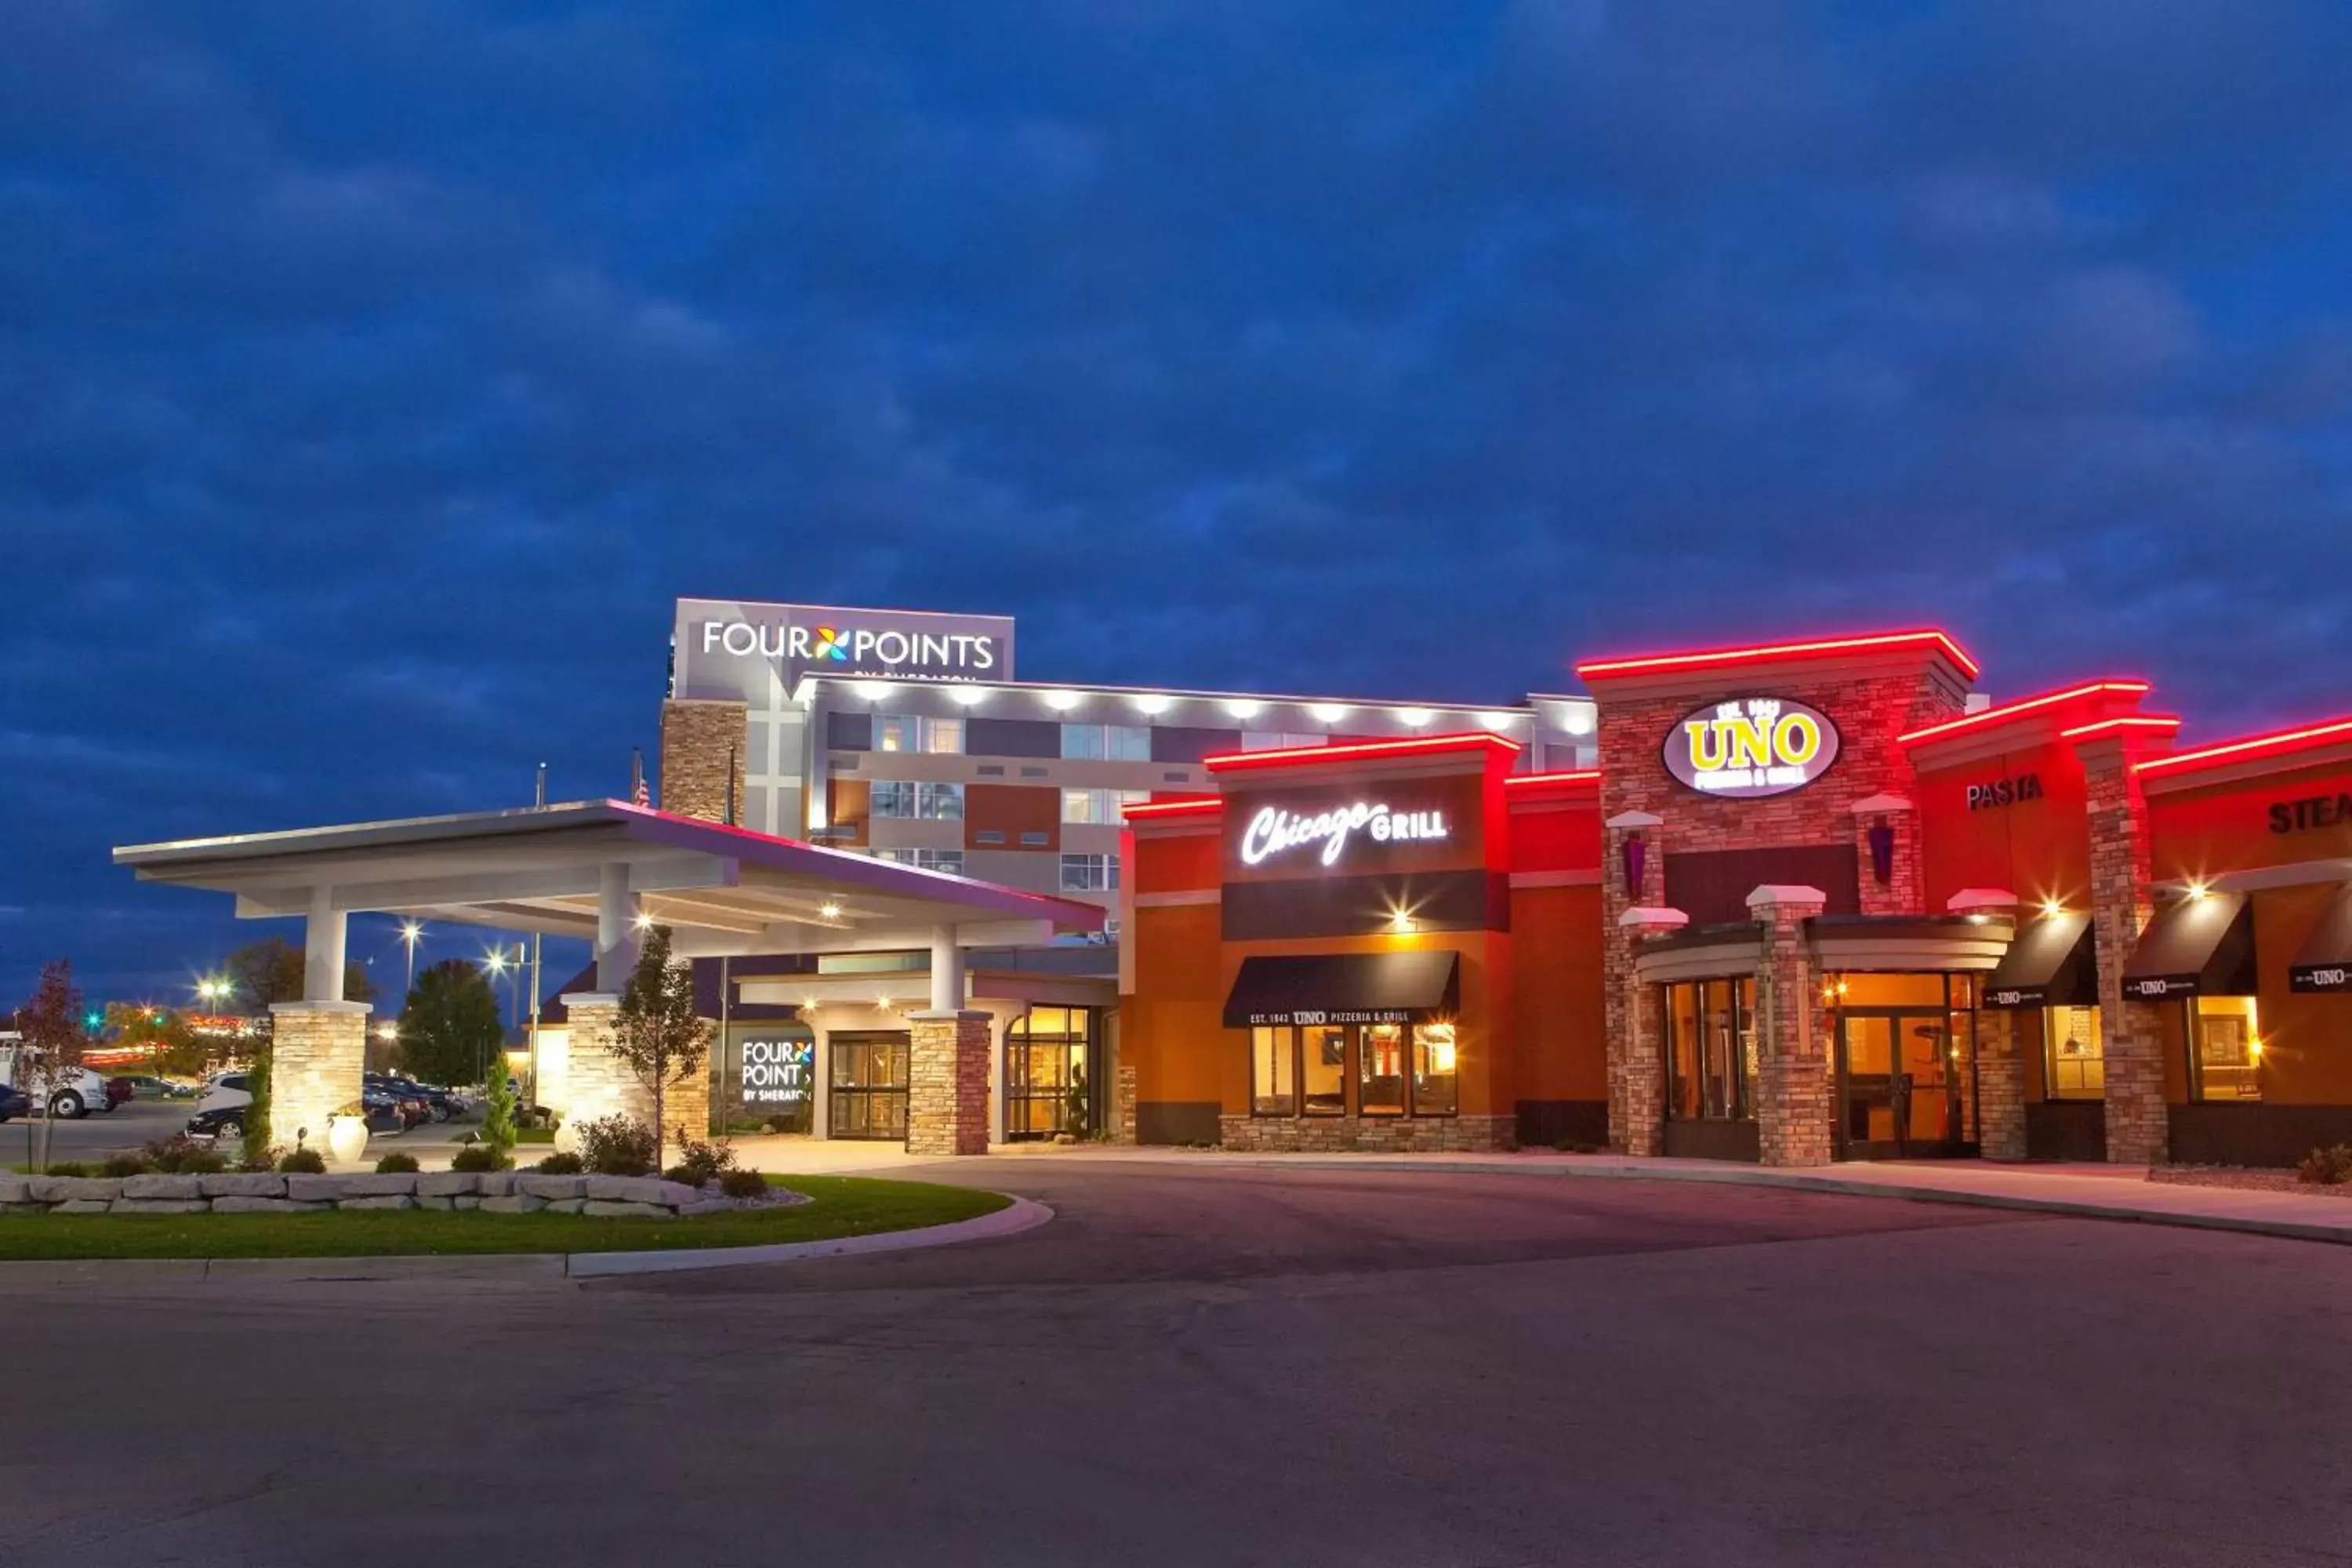 Property Building in Four Points By Sheraton - Saginaw